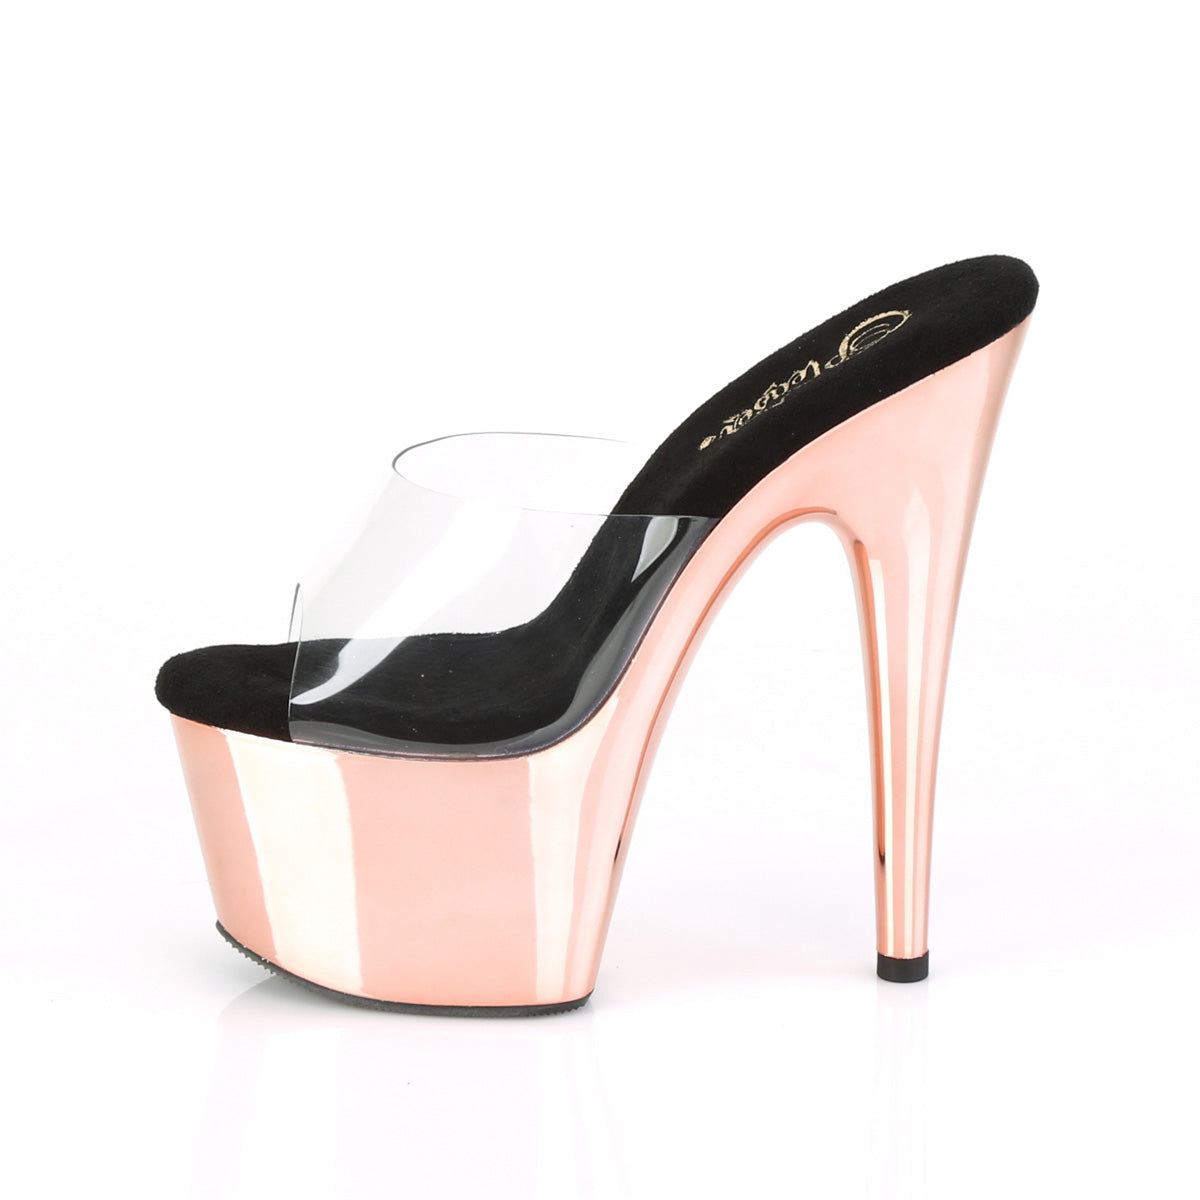 ADORE-701 Sexy 7" Heel Clear Rose Gold Stripper Sandals-Pleaser- Sexy Shoes Pole Dance Heels